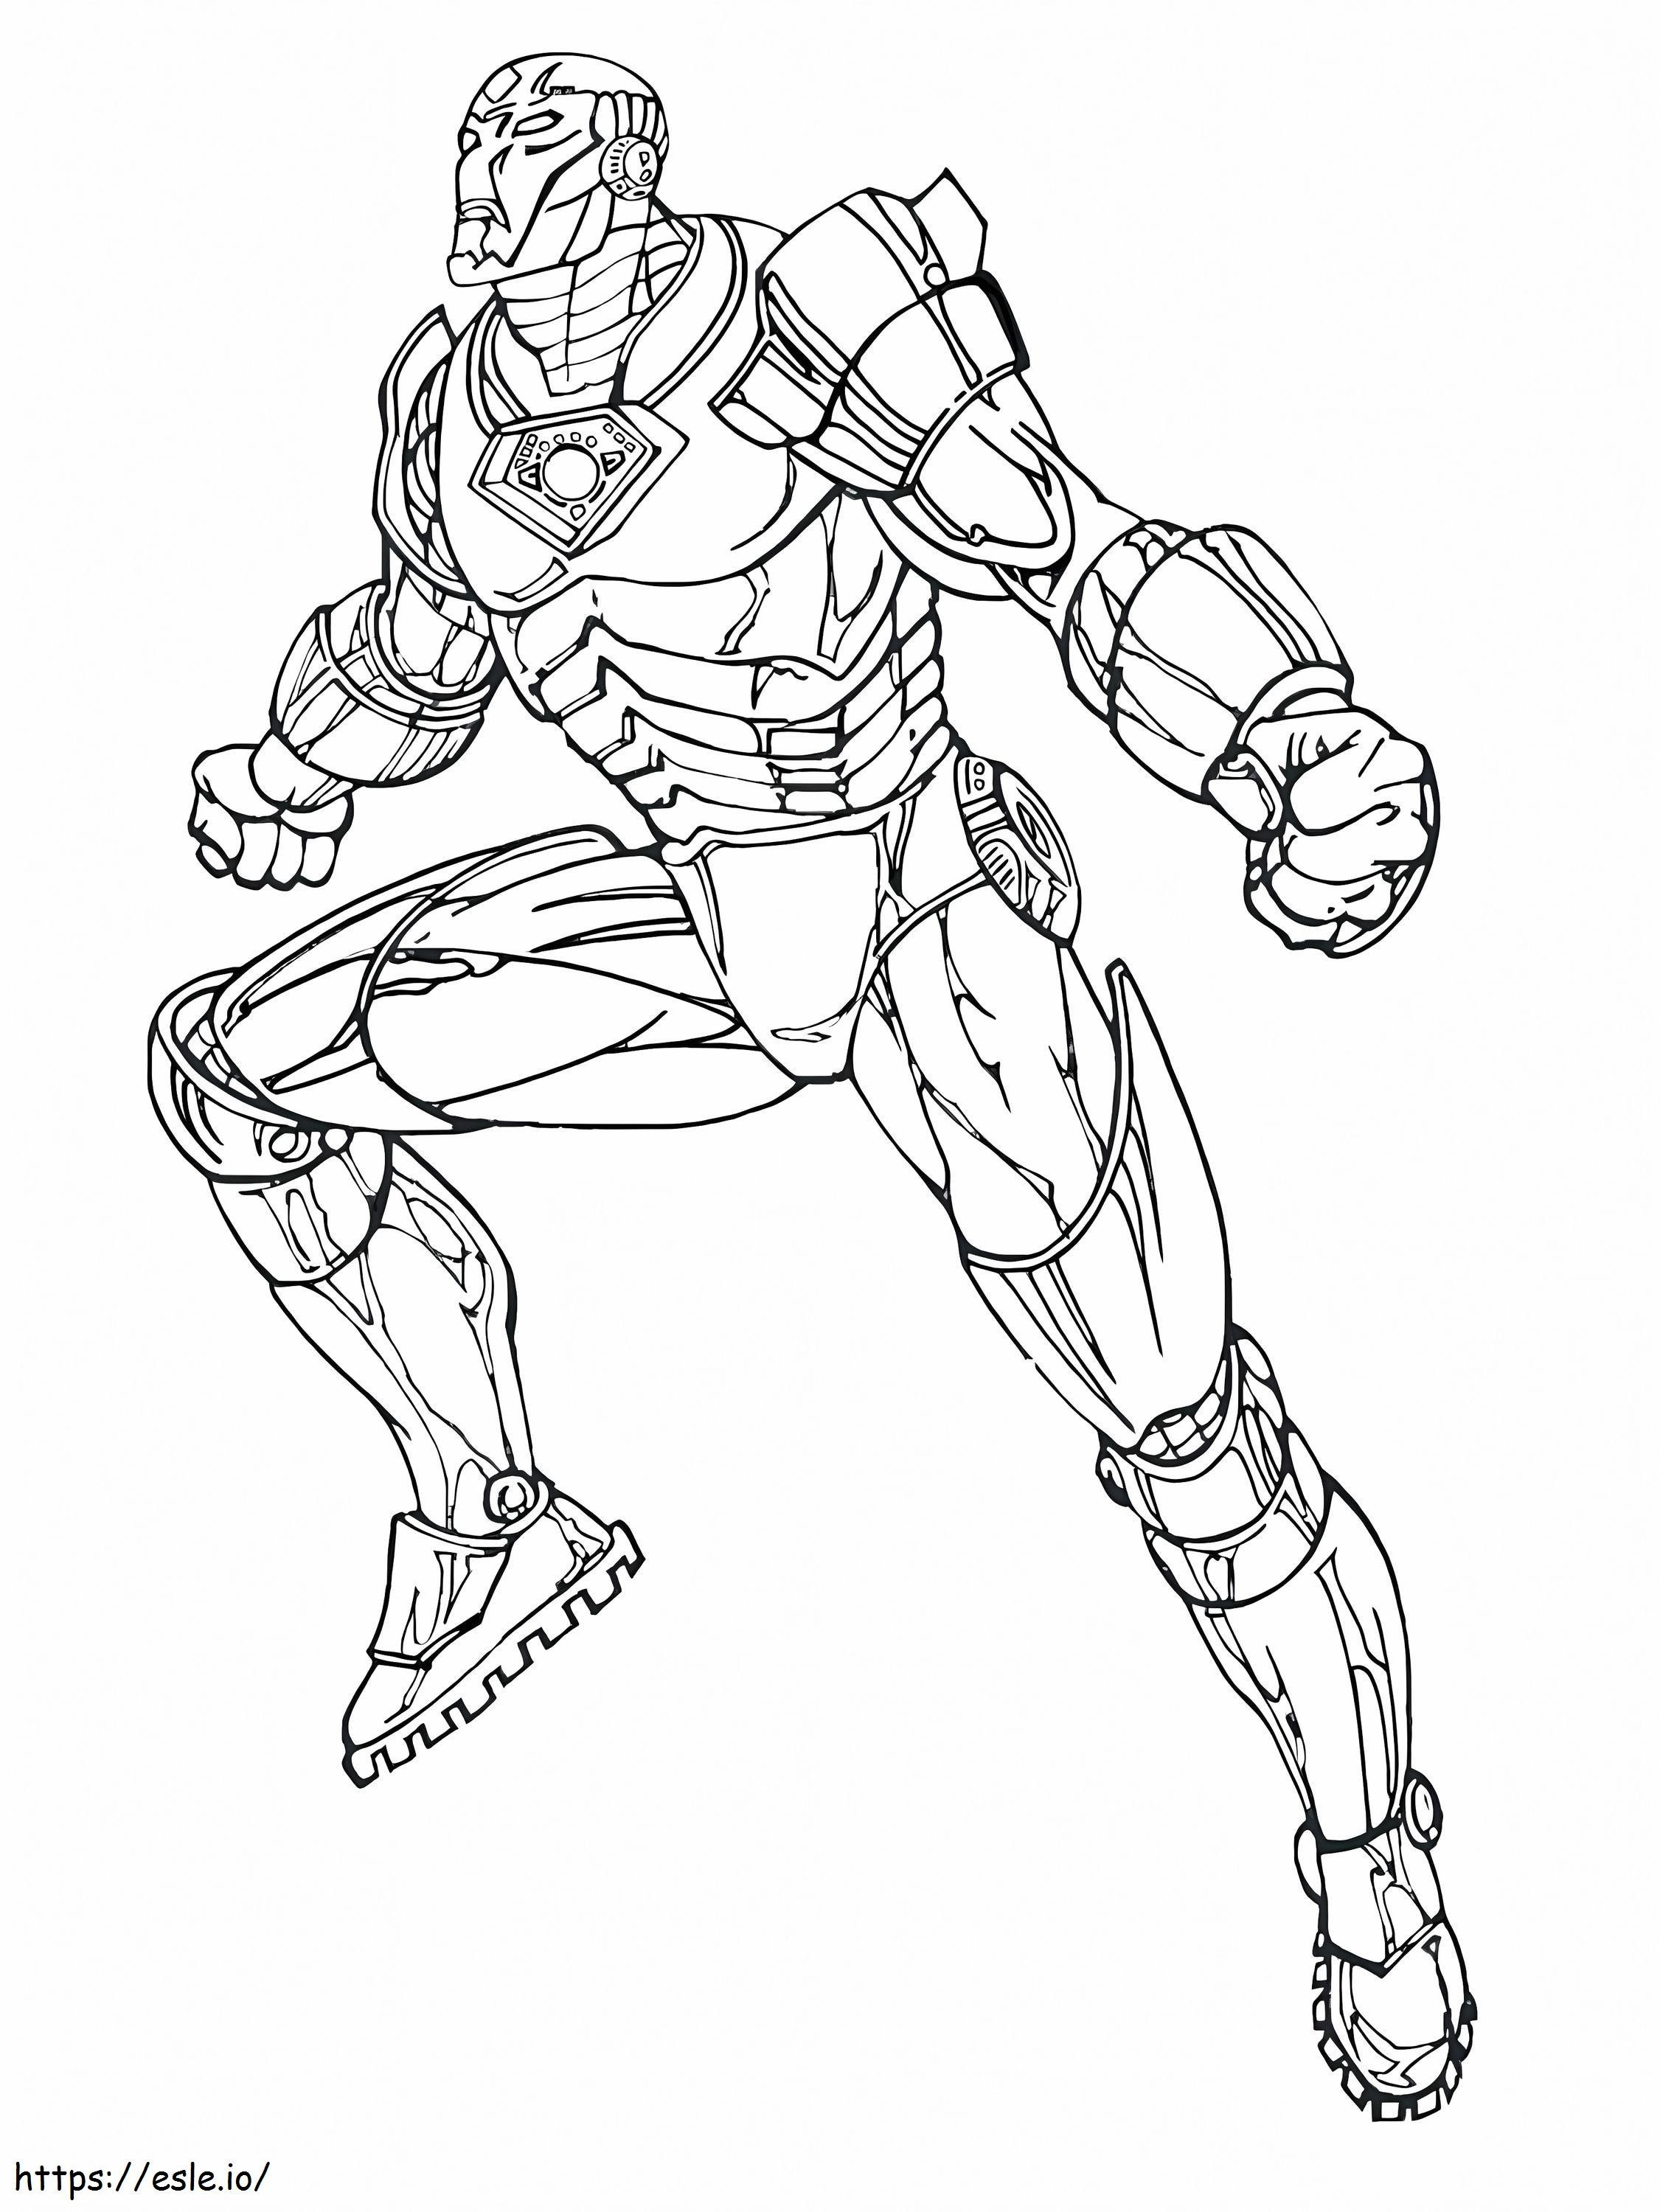 Iron Man 5 coloring page